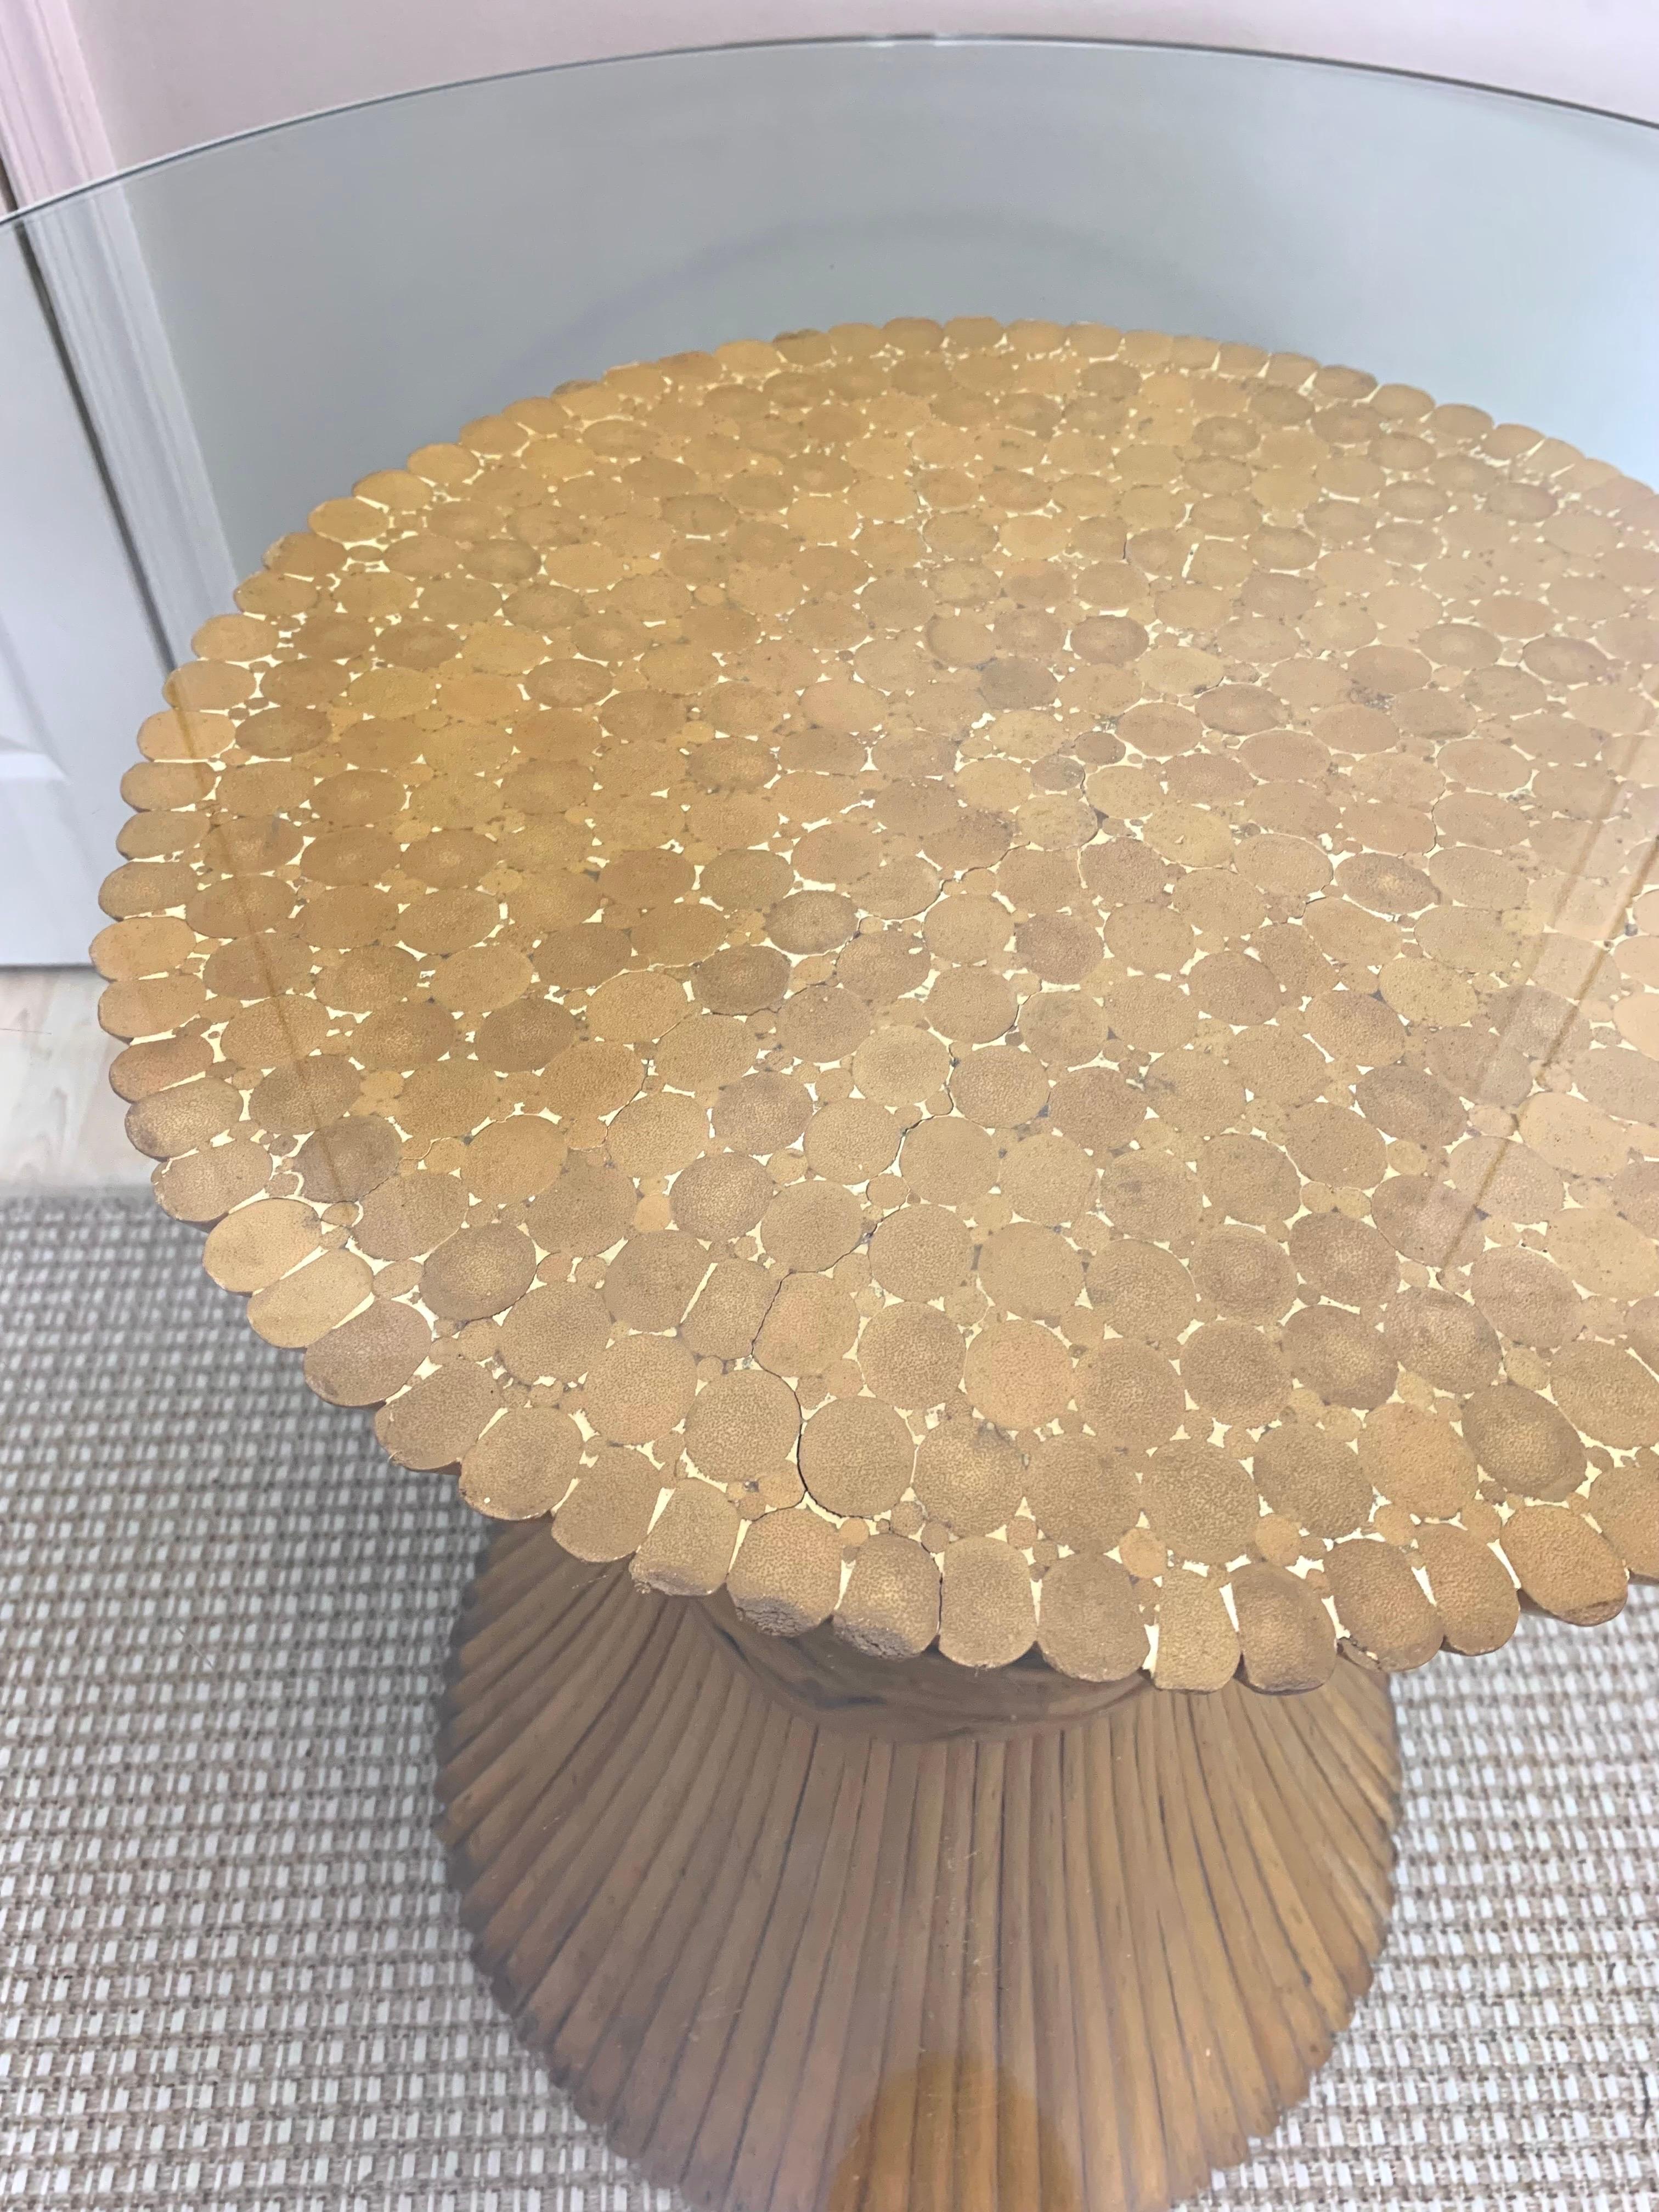 Vintage 1970s Mcguire style sheaf of wheat rattan dining table base with glass top. Interesting tied rattan design and braided ring.

Glass top 42” diameter, 1/2” thick 
Overall height 29 5/8”
Base 21.5” diameter.